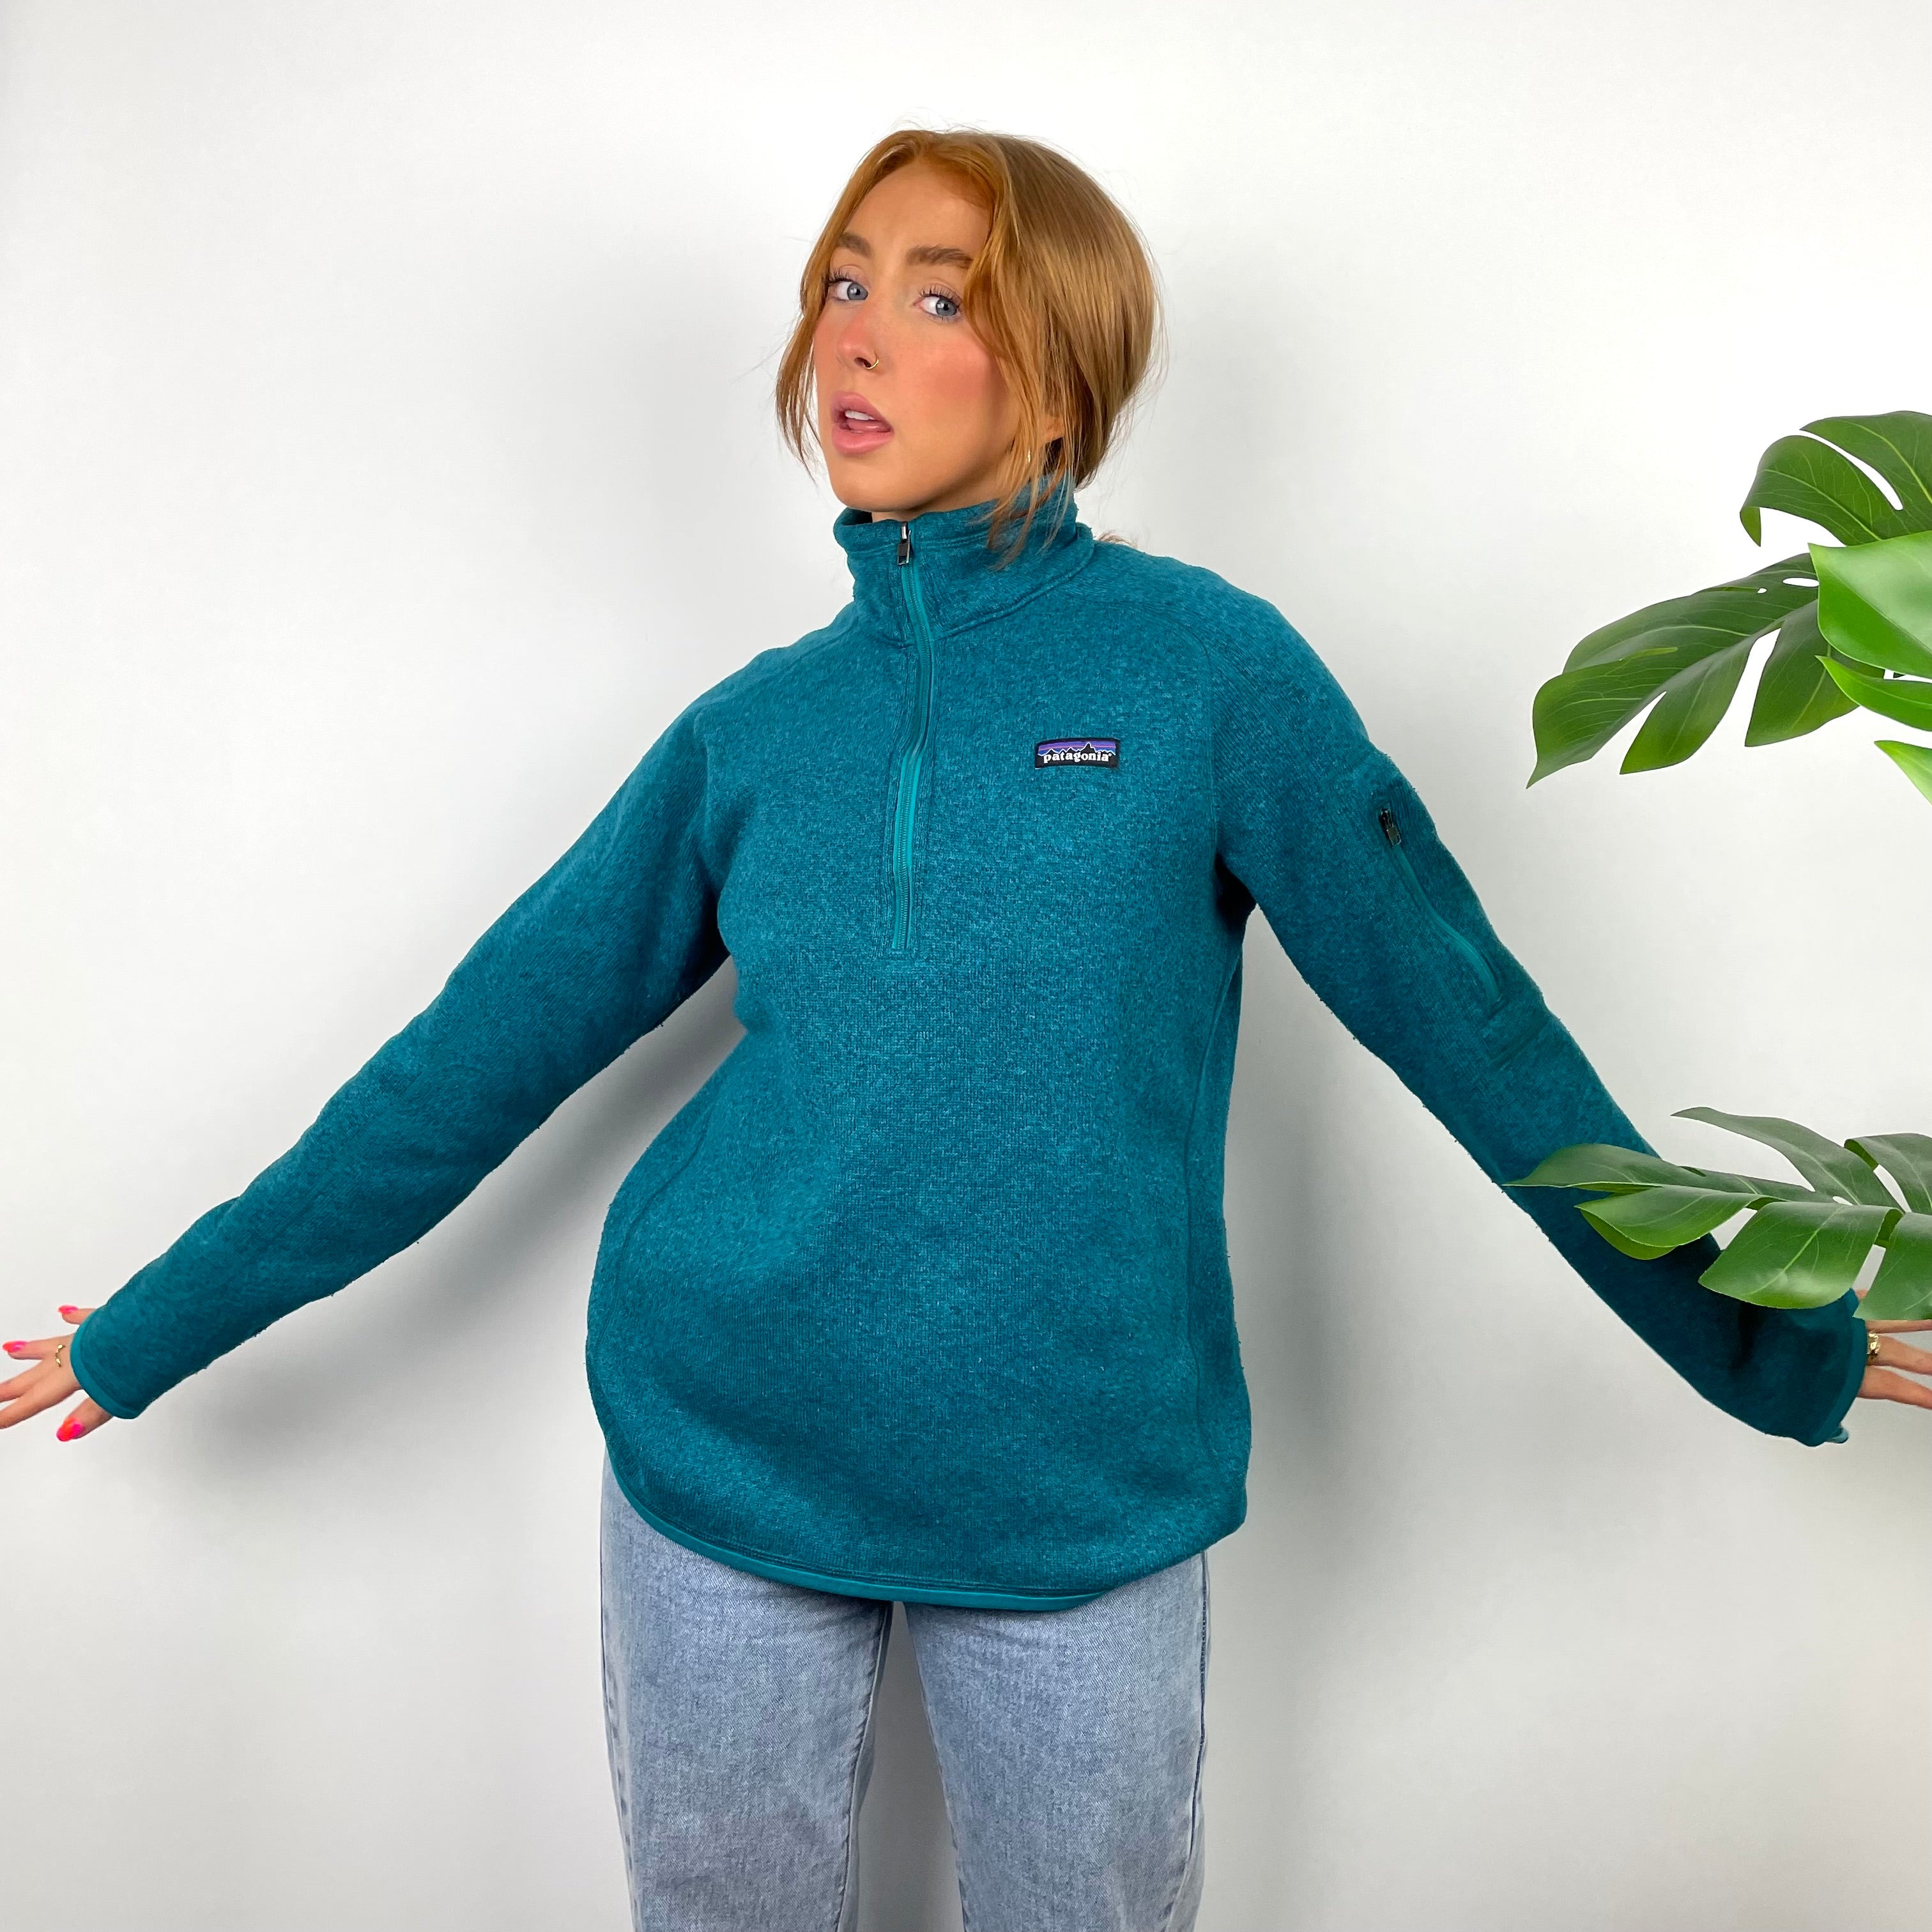 Patagonia RARE Turquoise Green Embroidered Spell Out Quarter Zip Sweatshirt (M)